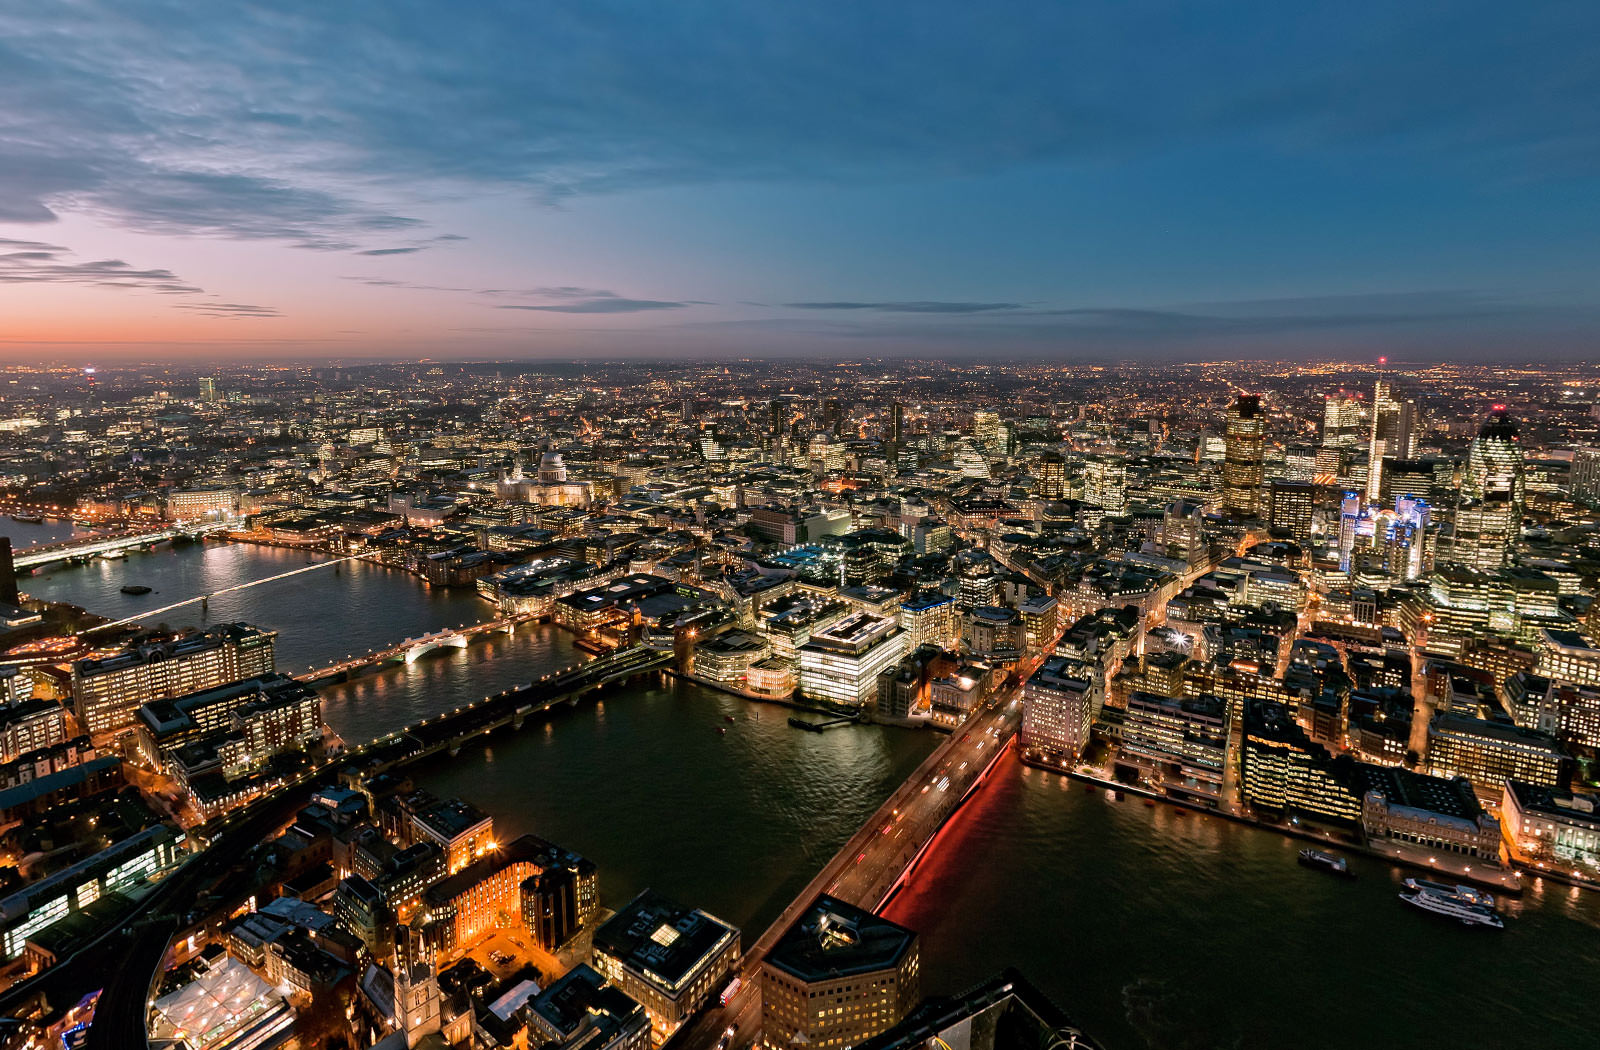 360 Virtual Reality View from a crane during construction of the Shard